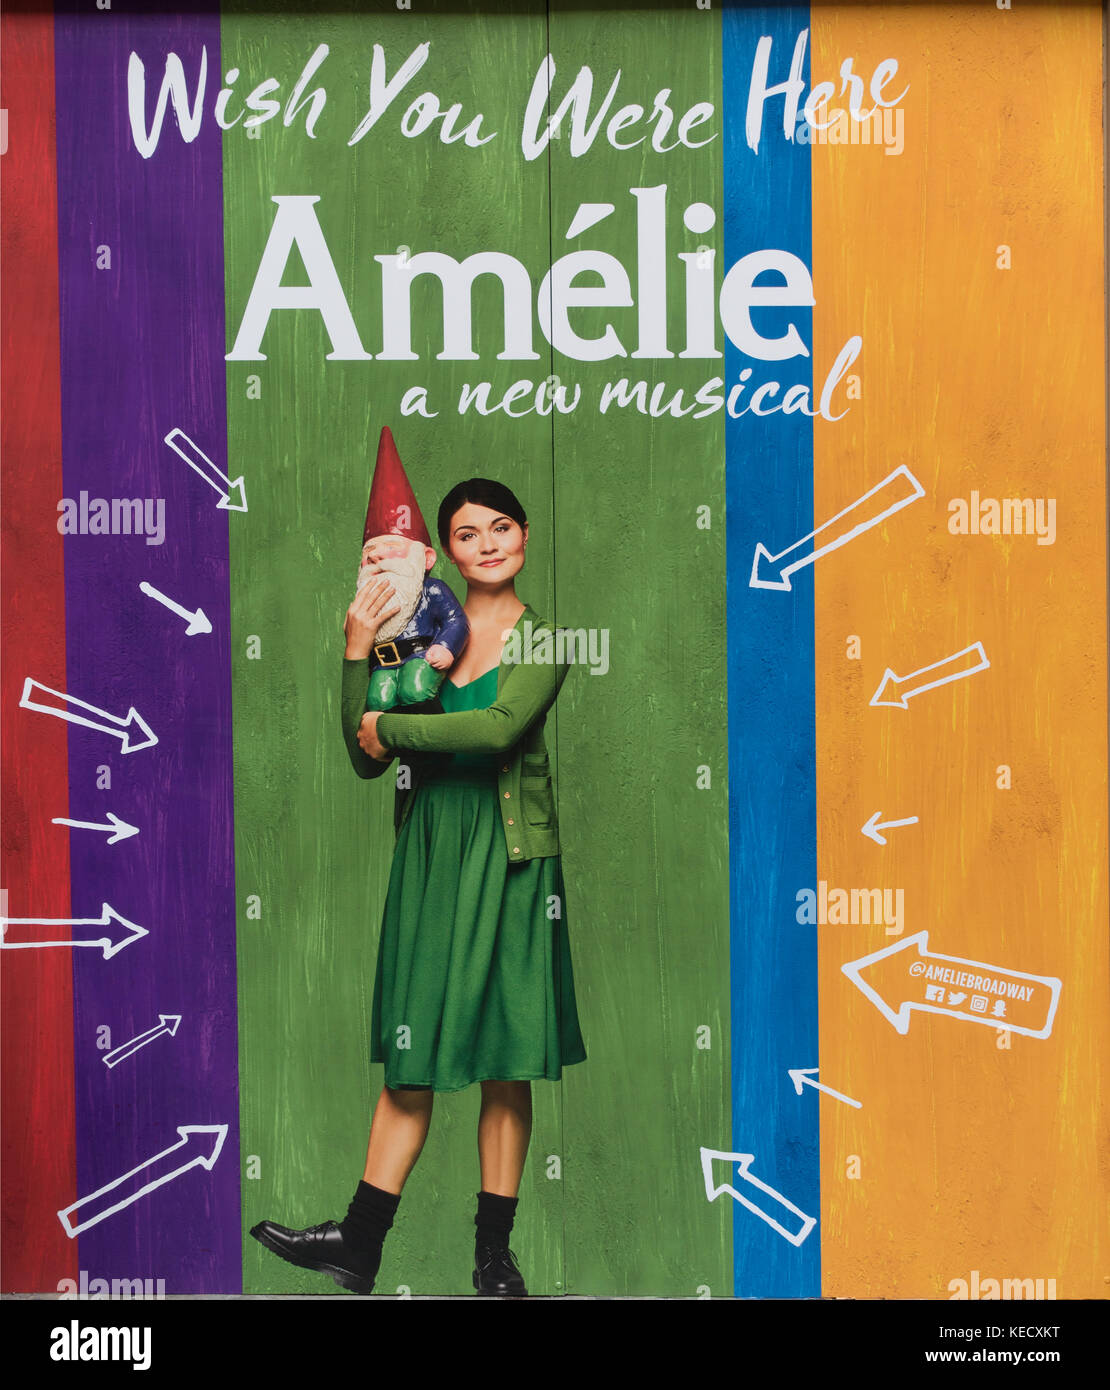 Amelie Broadway theater marquee NYC Stock Photo